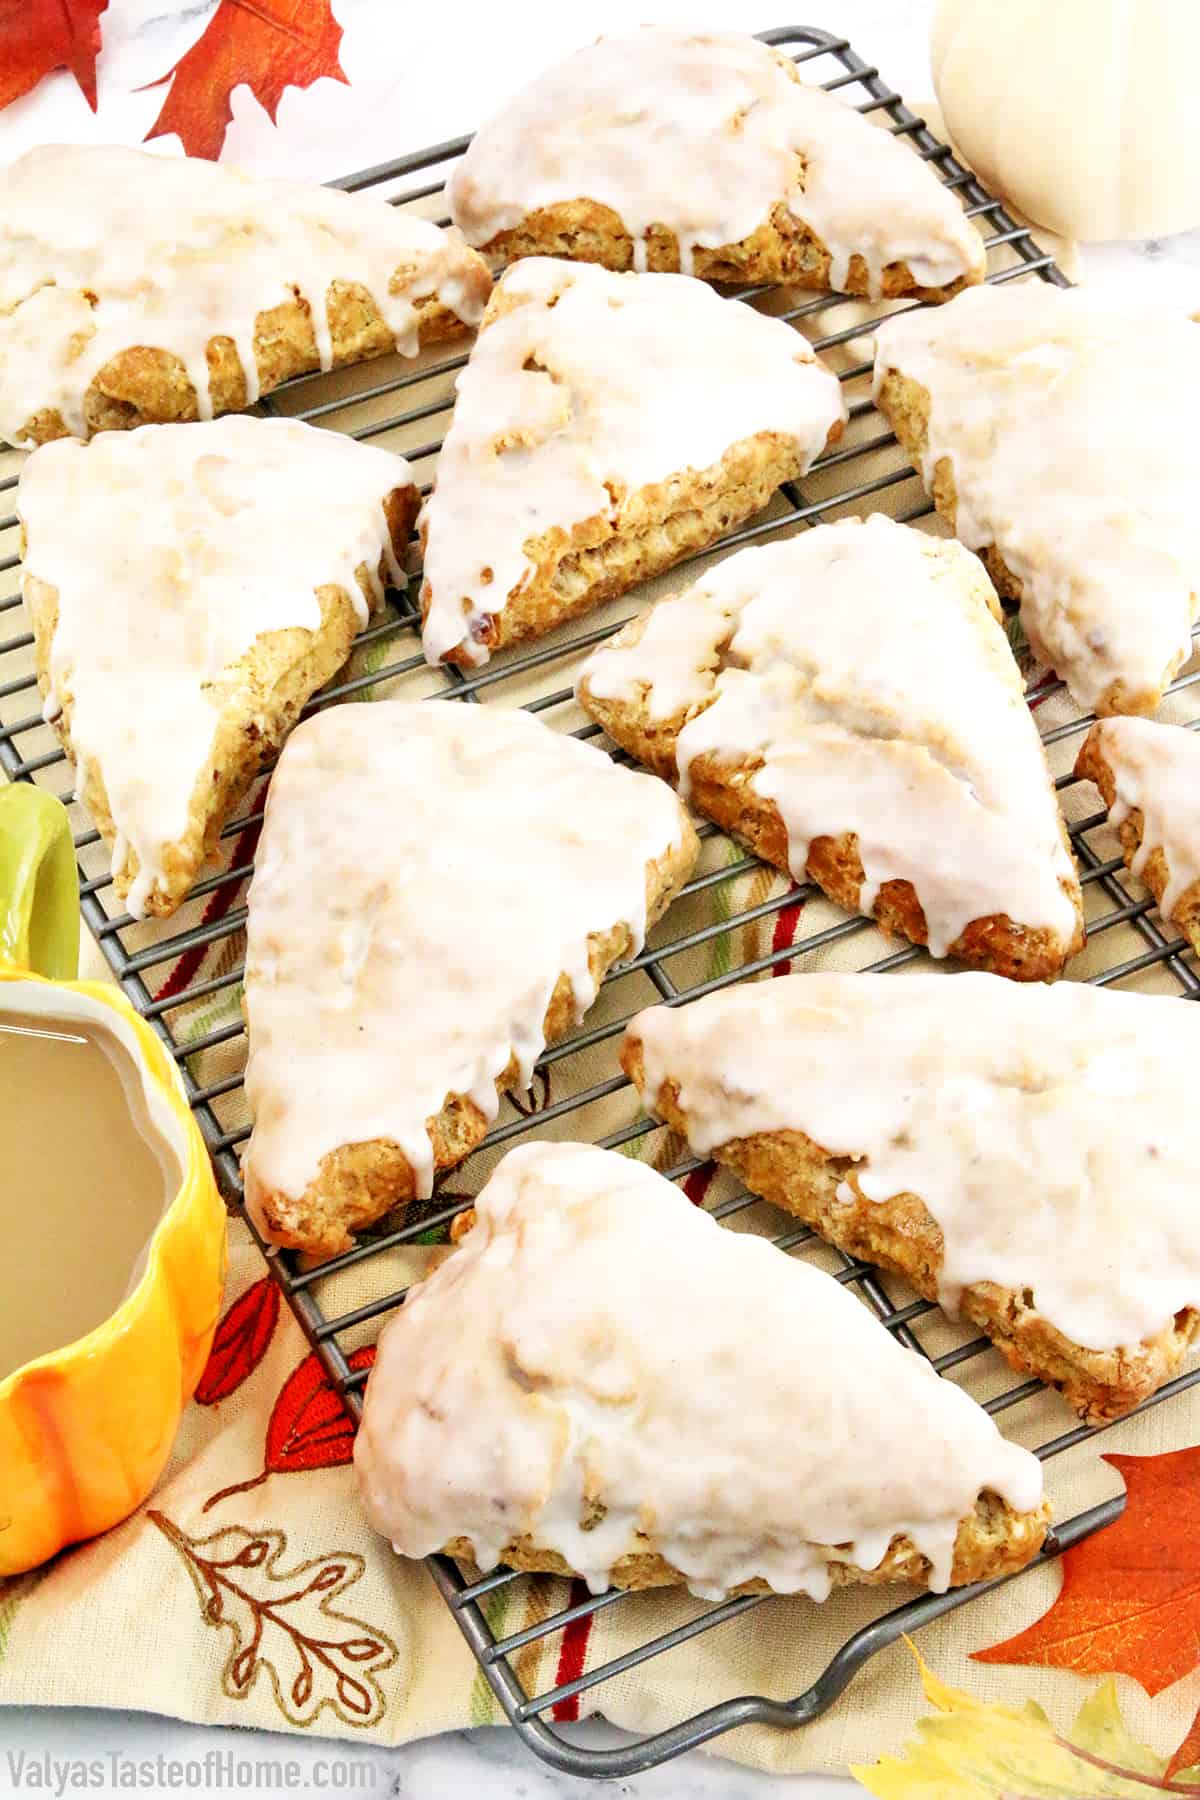 These Glazed Pumpkin Pecan Scones are soft, flaky, buttery, and bursting with cinnamon and pumpkin flavors. They are super simple to make but very delicious fall treat that is so much loved in my family. #pumpkinscones #glazedpumpkinpecanscones #breakfast #easyrecipe #valyastasteofhome